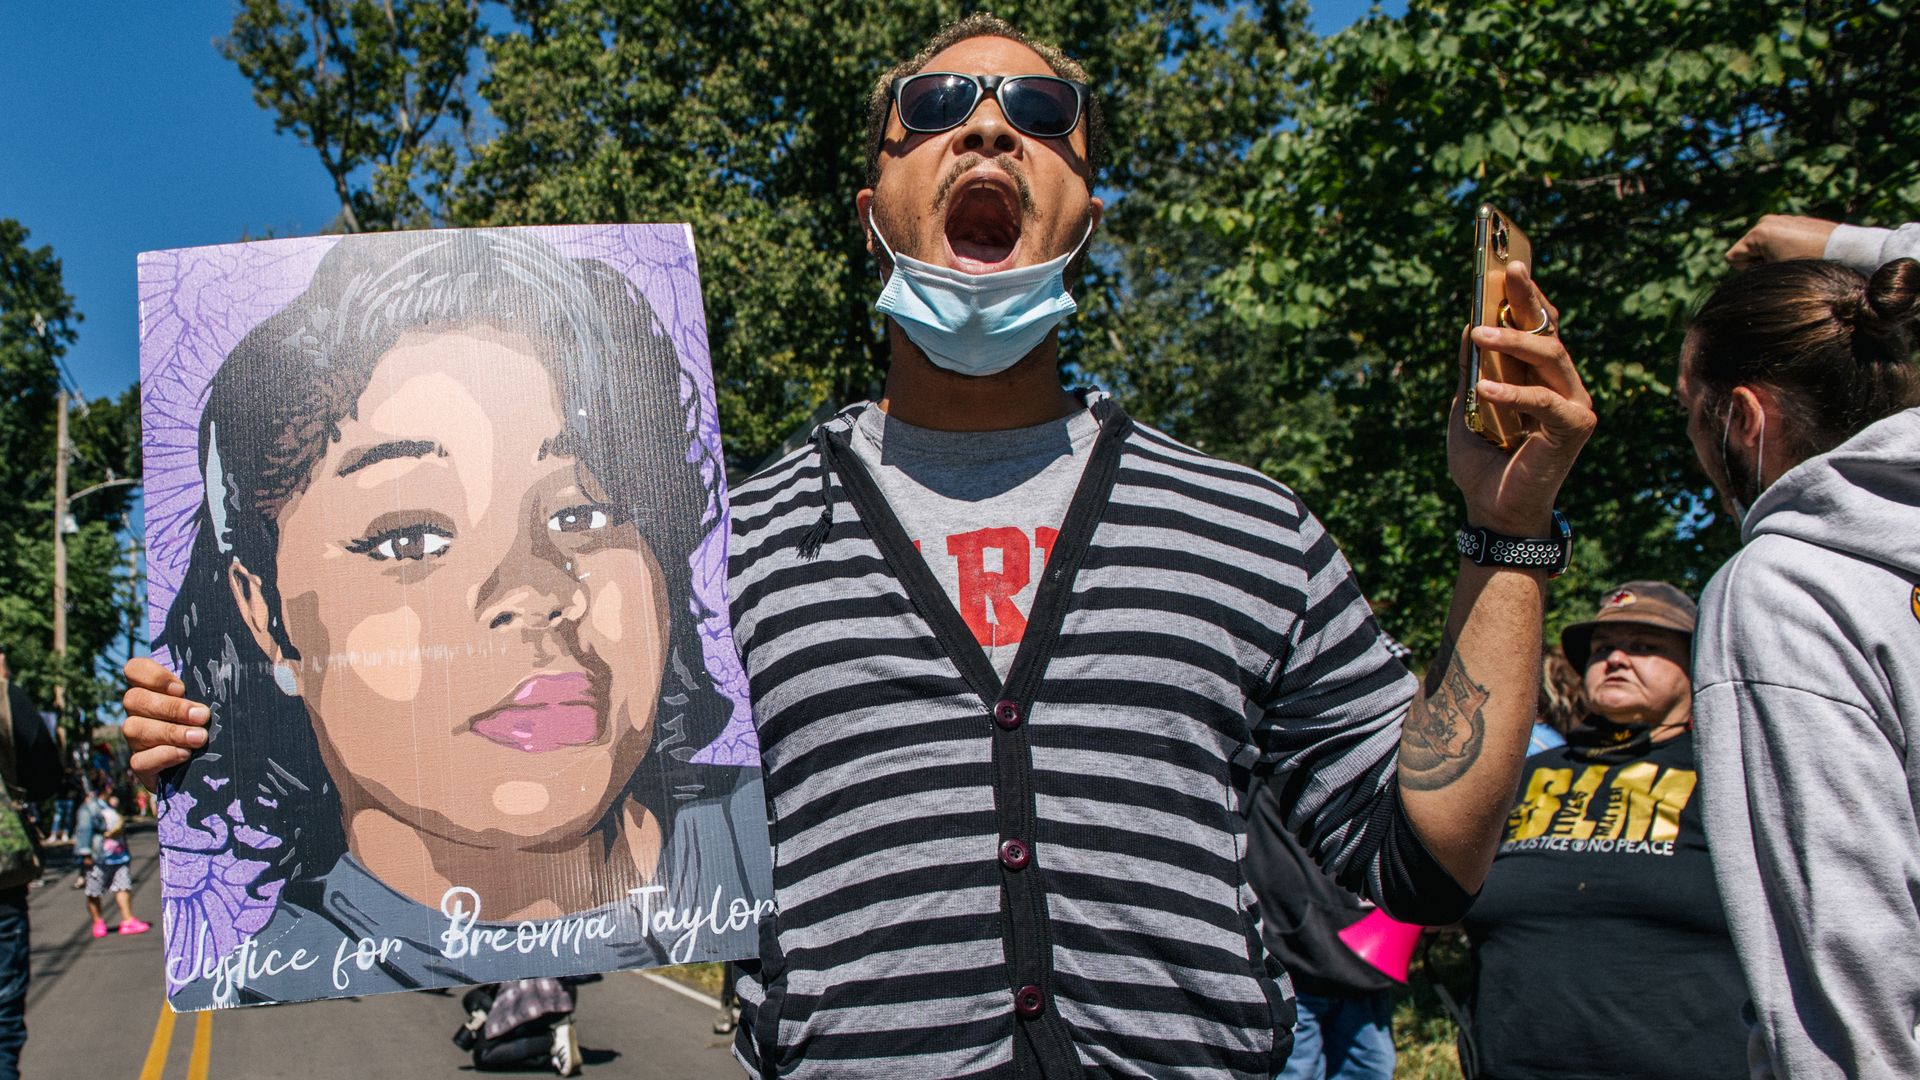 A demonstrator holds up a sign of Breonna Taylor while chanting during a protest (Photo by Brandon Bell/Getty Images)